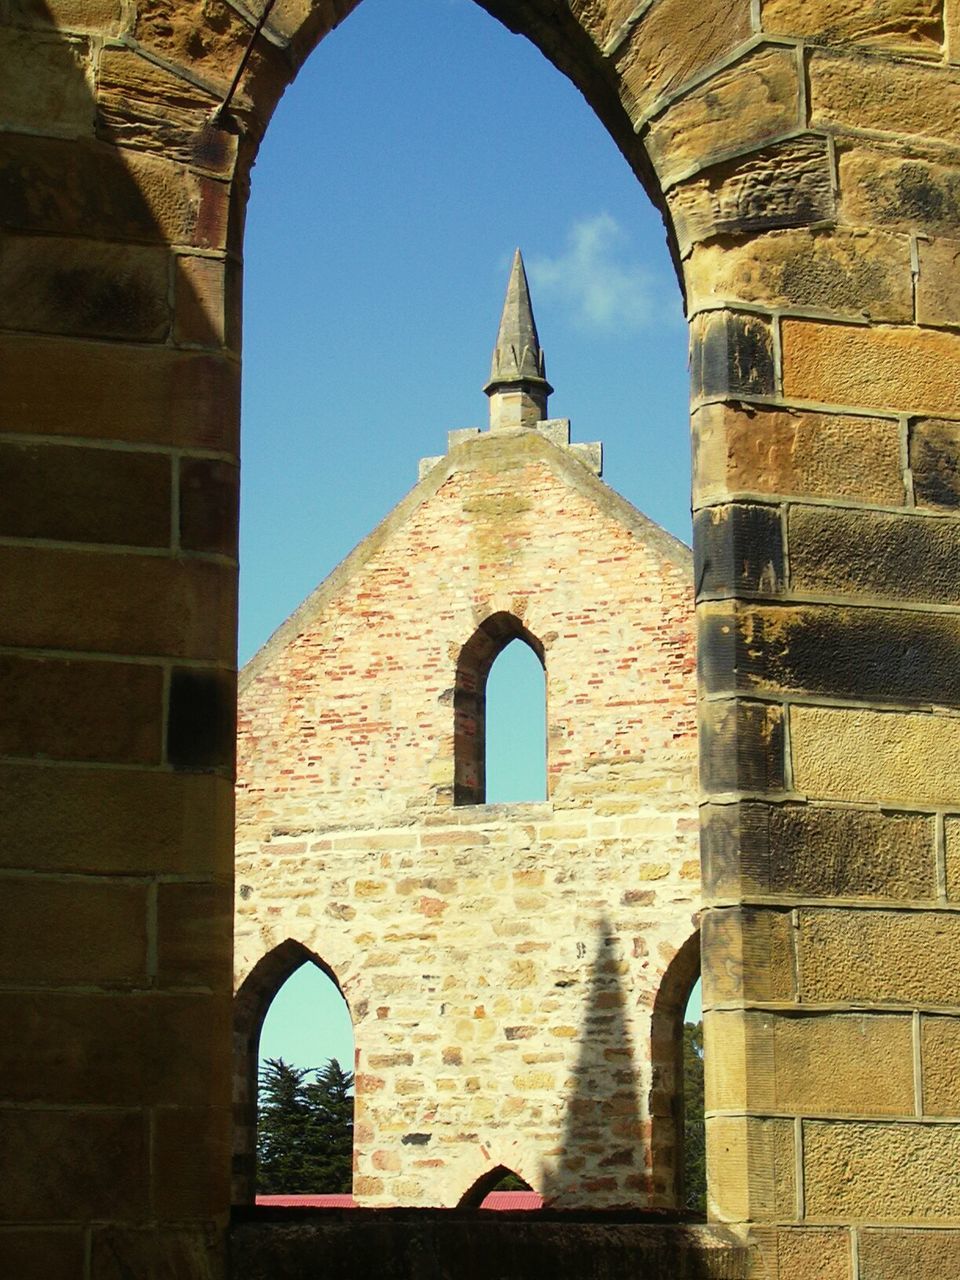 LOW ANGLE VIEW OF BELL TOWER AT THE ENTRANCE